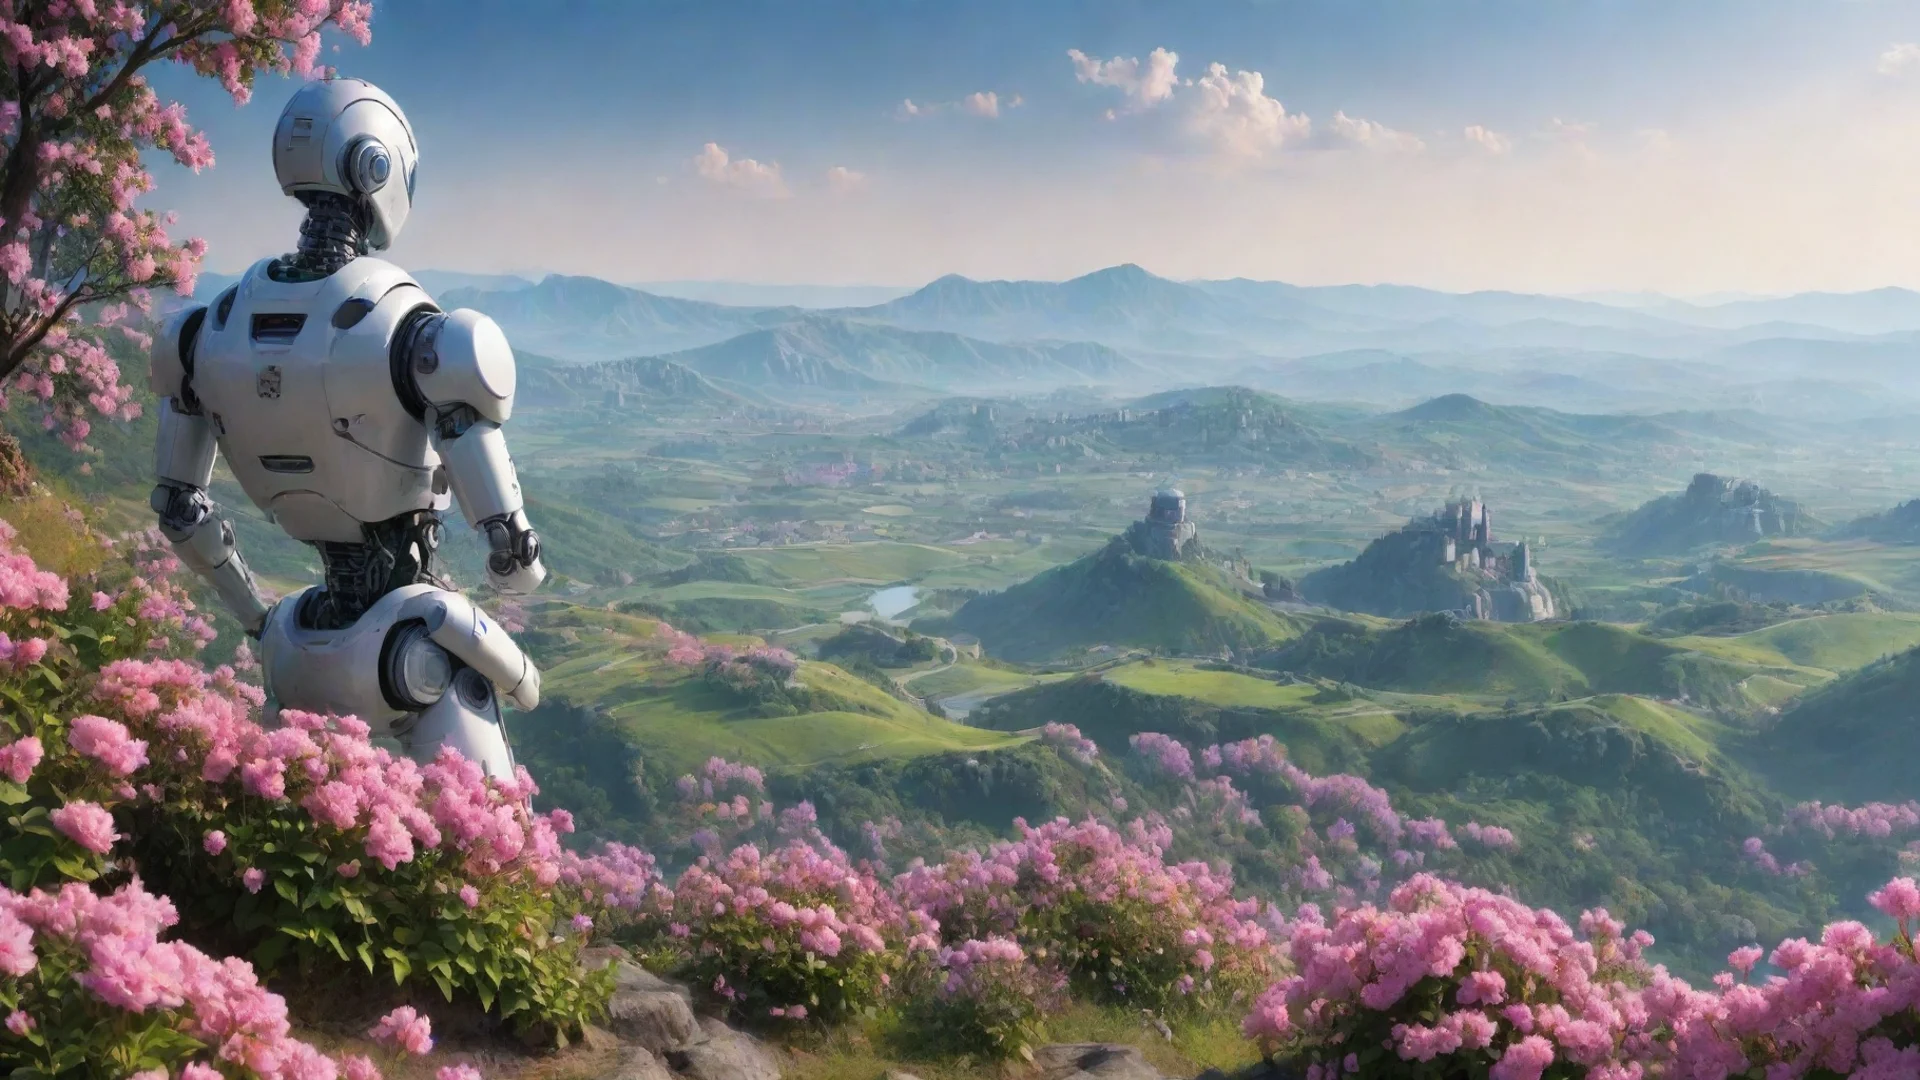 aiamazing robot looking at sweeping views hd aesthetic best quality beautiful landscape environment flowers awesome portrait 2 wide